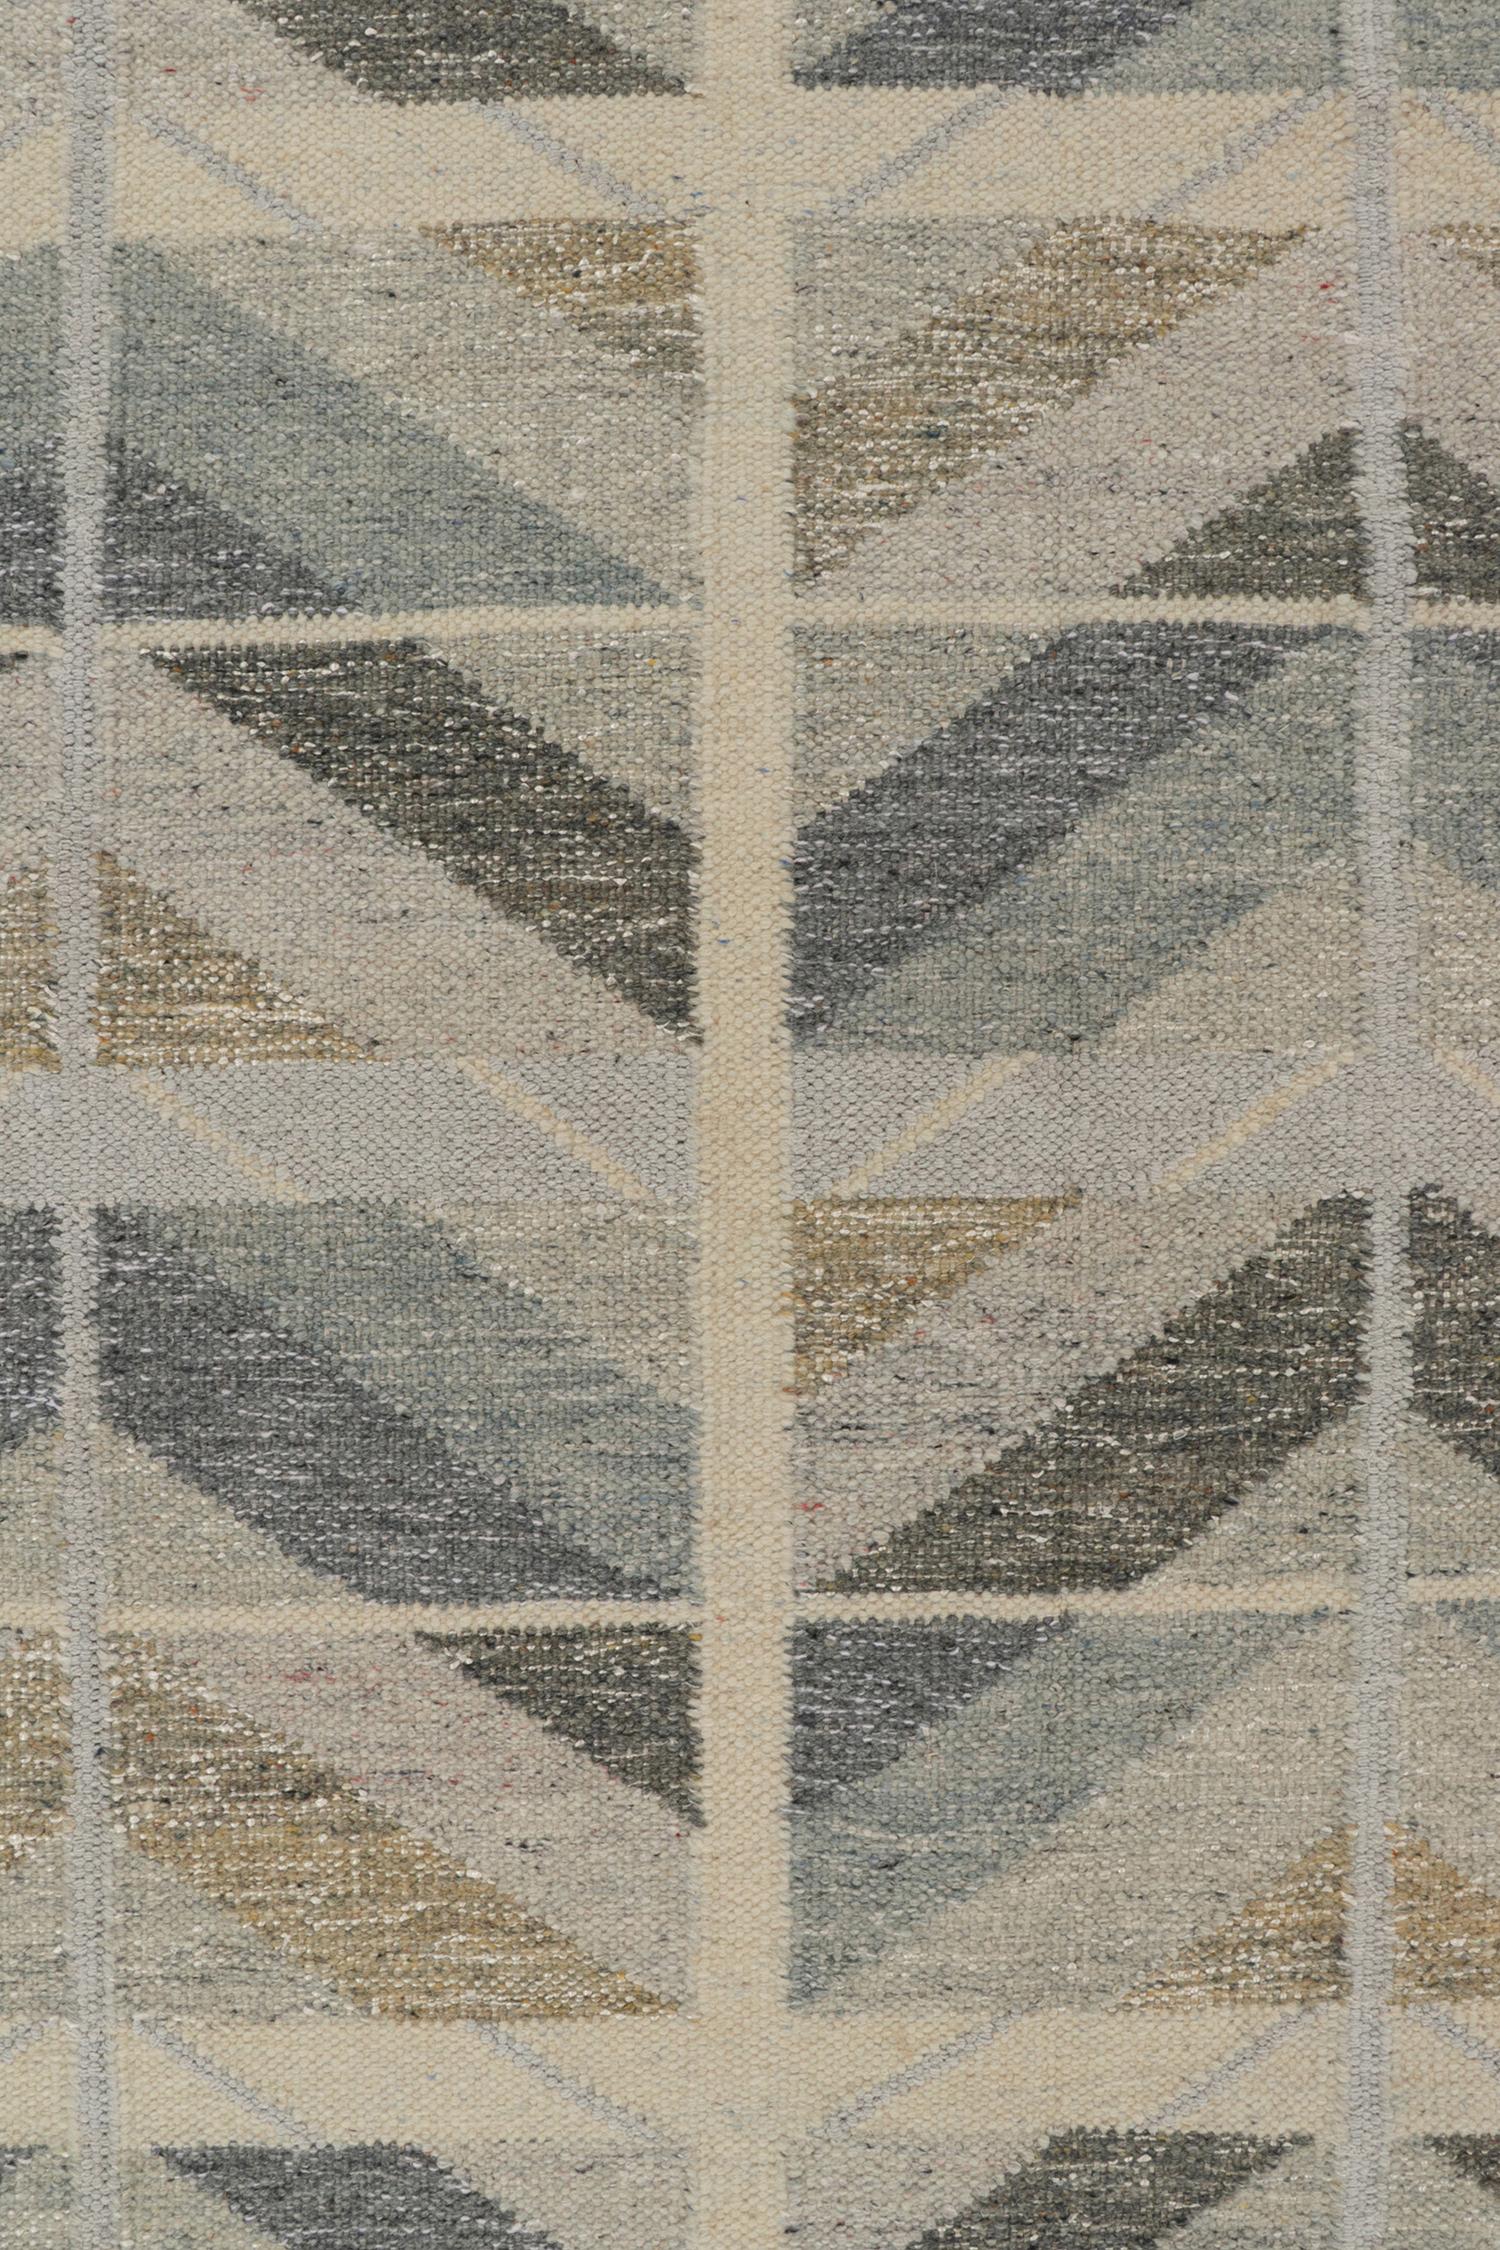 Rug & Kilim’s Scandinavian Style Kilim in Grey, Beige and Blue Chevron Patterns In New Condition For Sale In Long Island City, NY